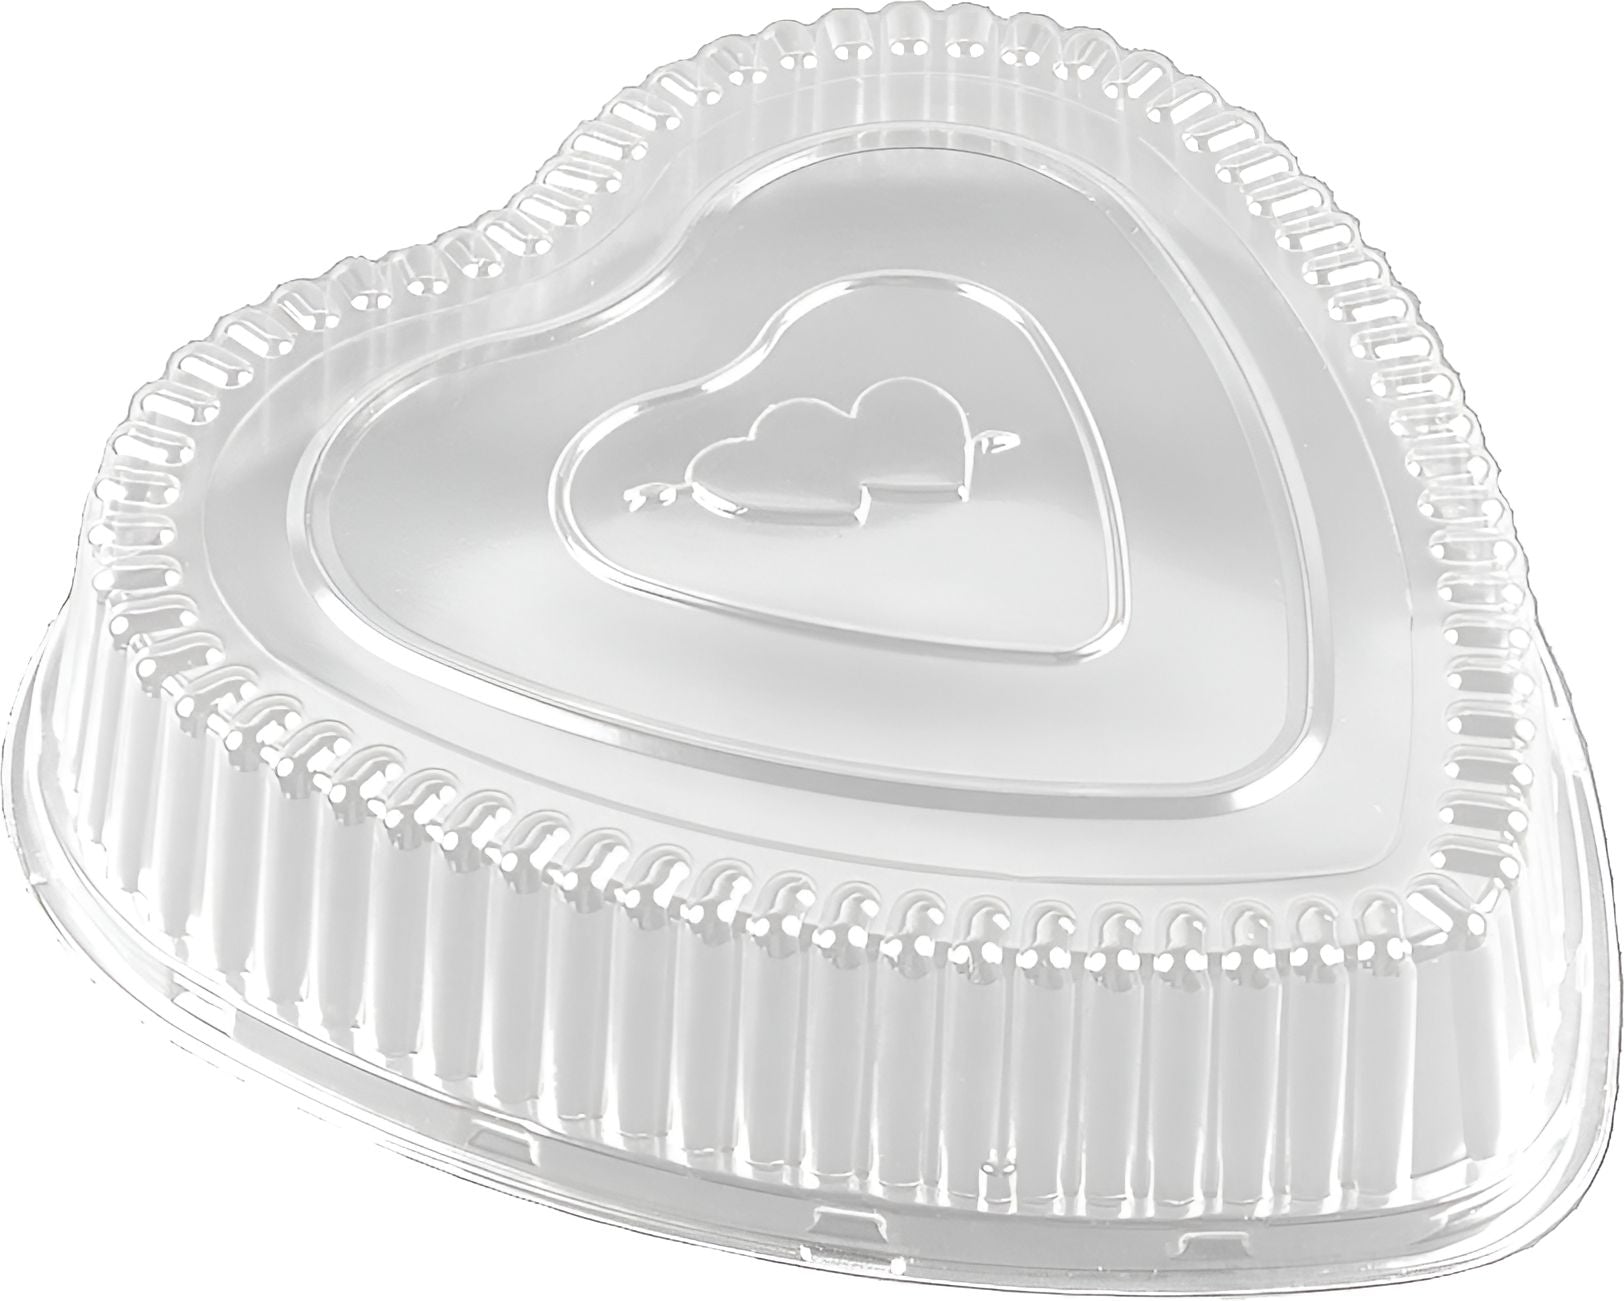 HFA - Plastic Dome Lid For 339-30 Heart Shaped Pan, 100/Cs - 339DL-100